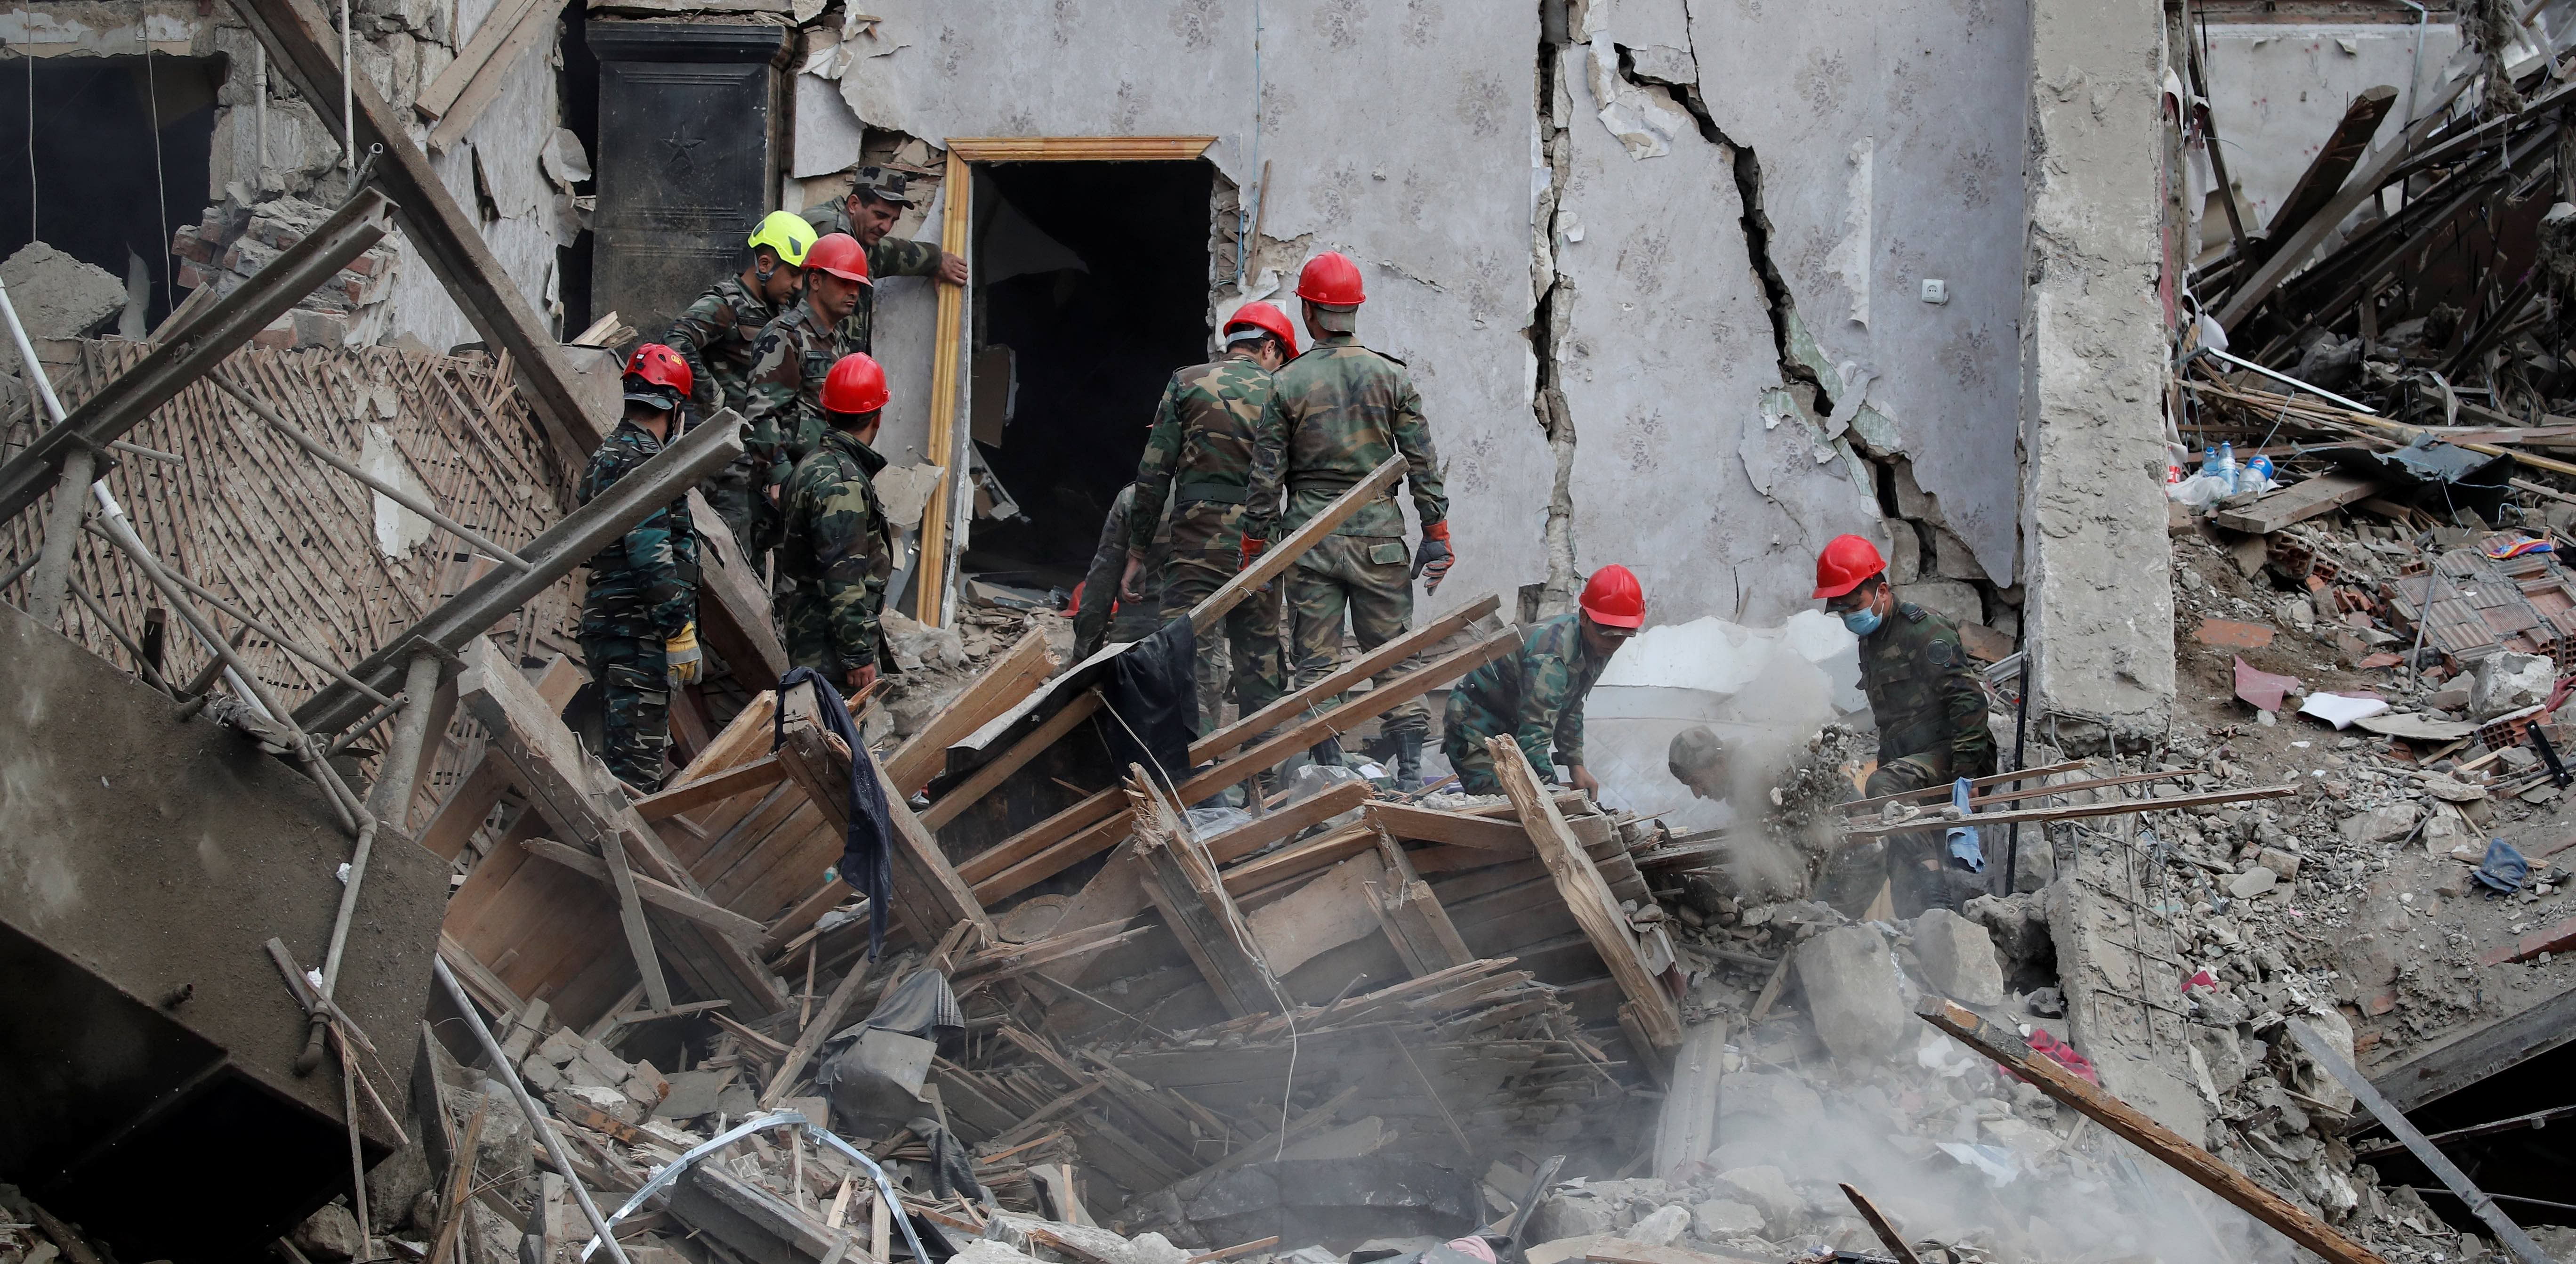 Search and rescue teams work on the blast site hit by a rocket during the fighting over the breakaway region of Nagorno-Karabakh in the city of Ganja, Azerbaijan. Credit: Reuters